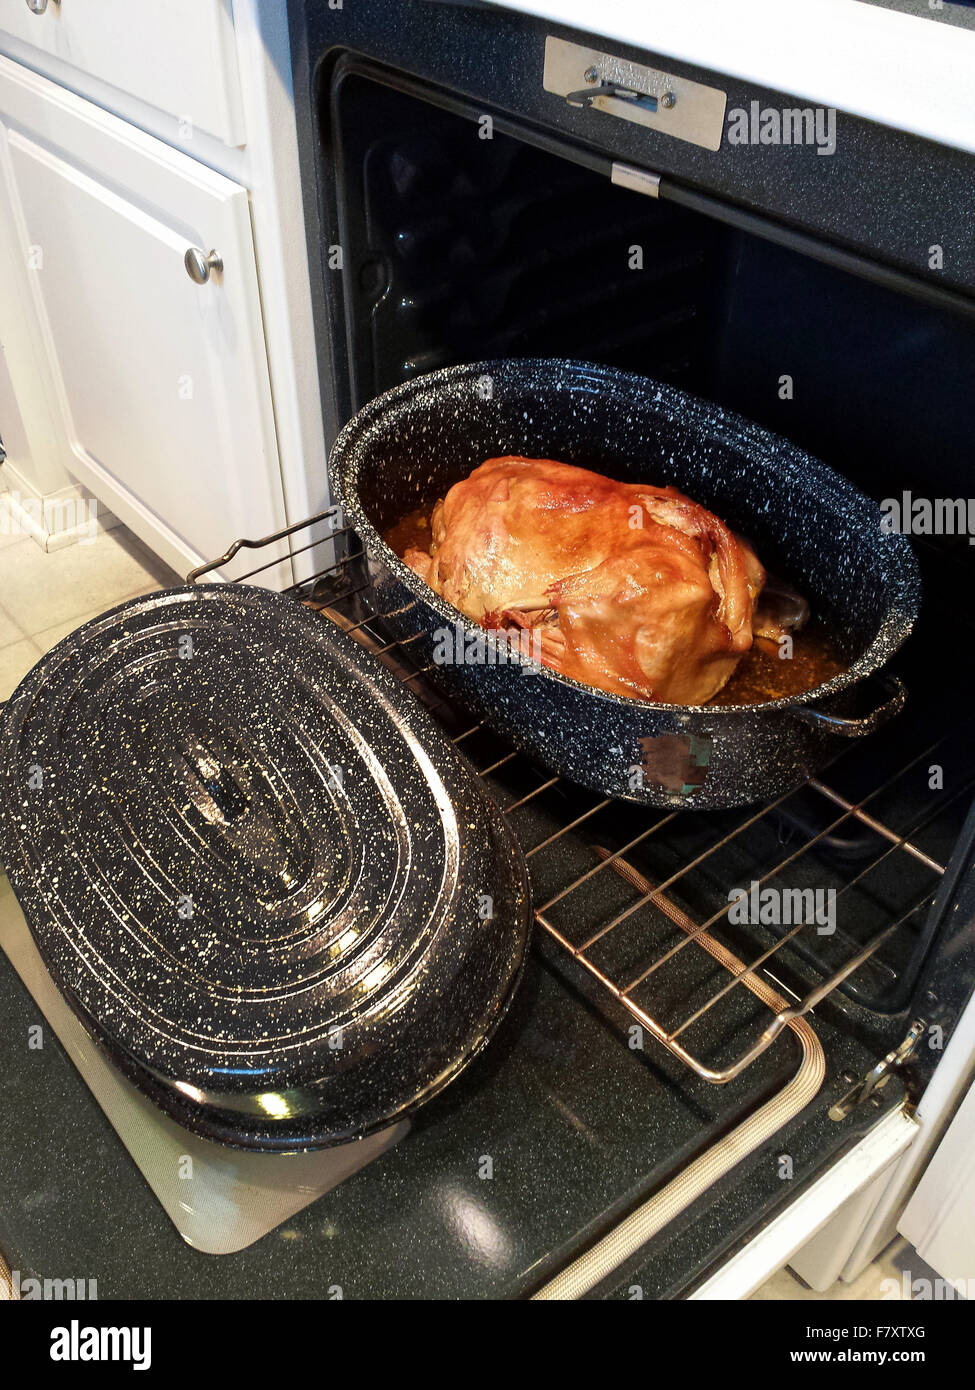 Roasted Thanksgiving turkey in old-fashioned turkey pan on oven rack. Stock Photo